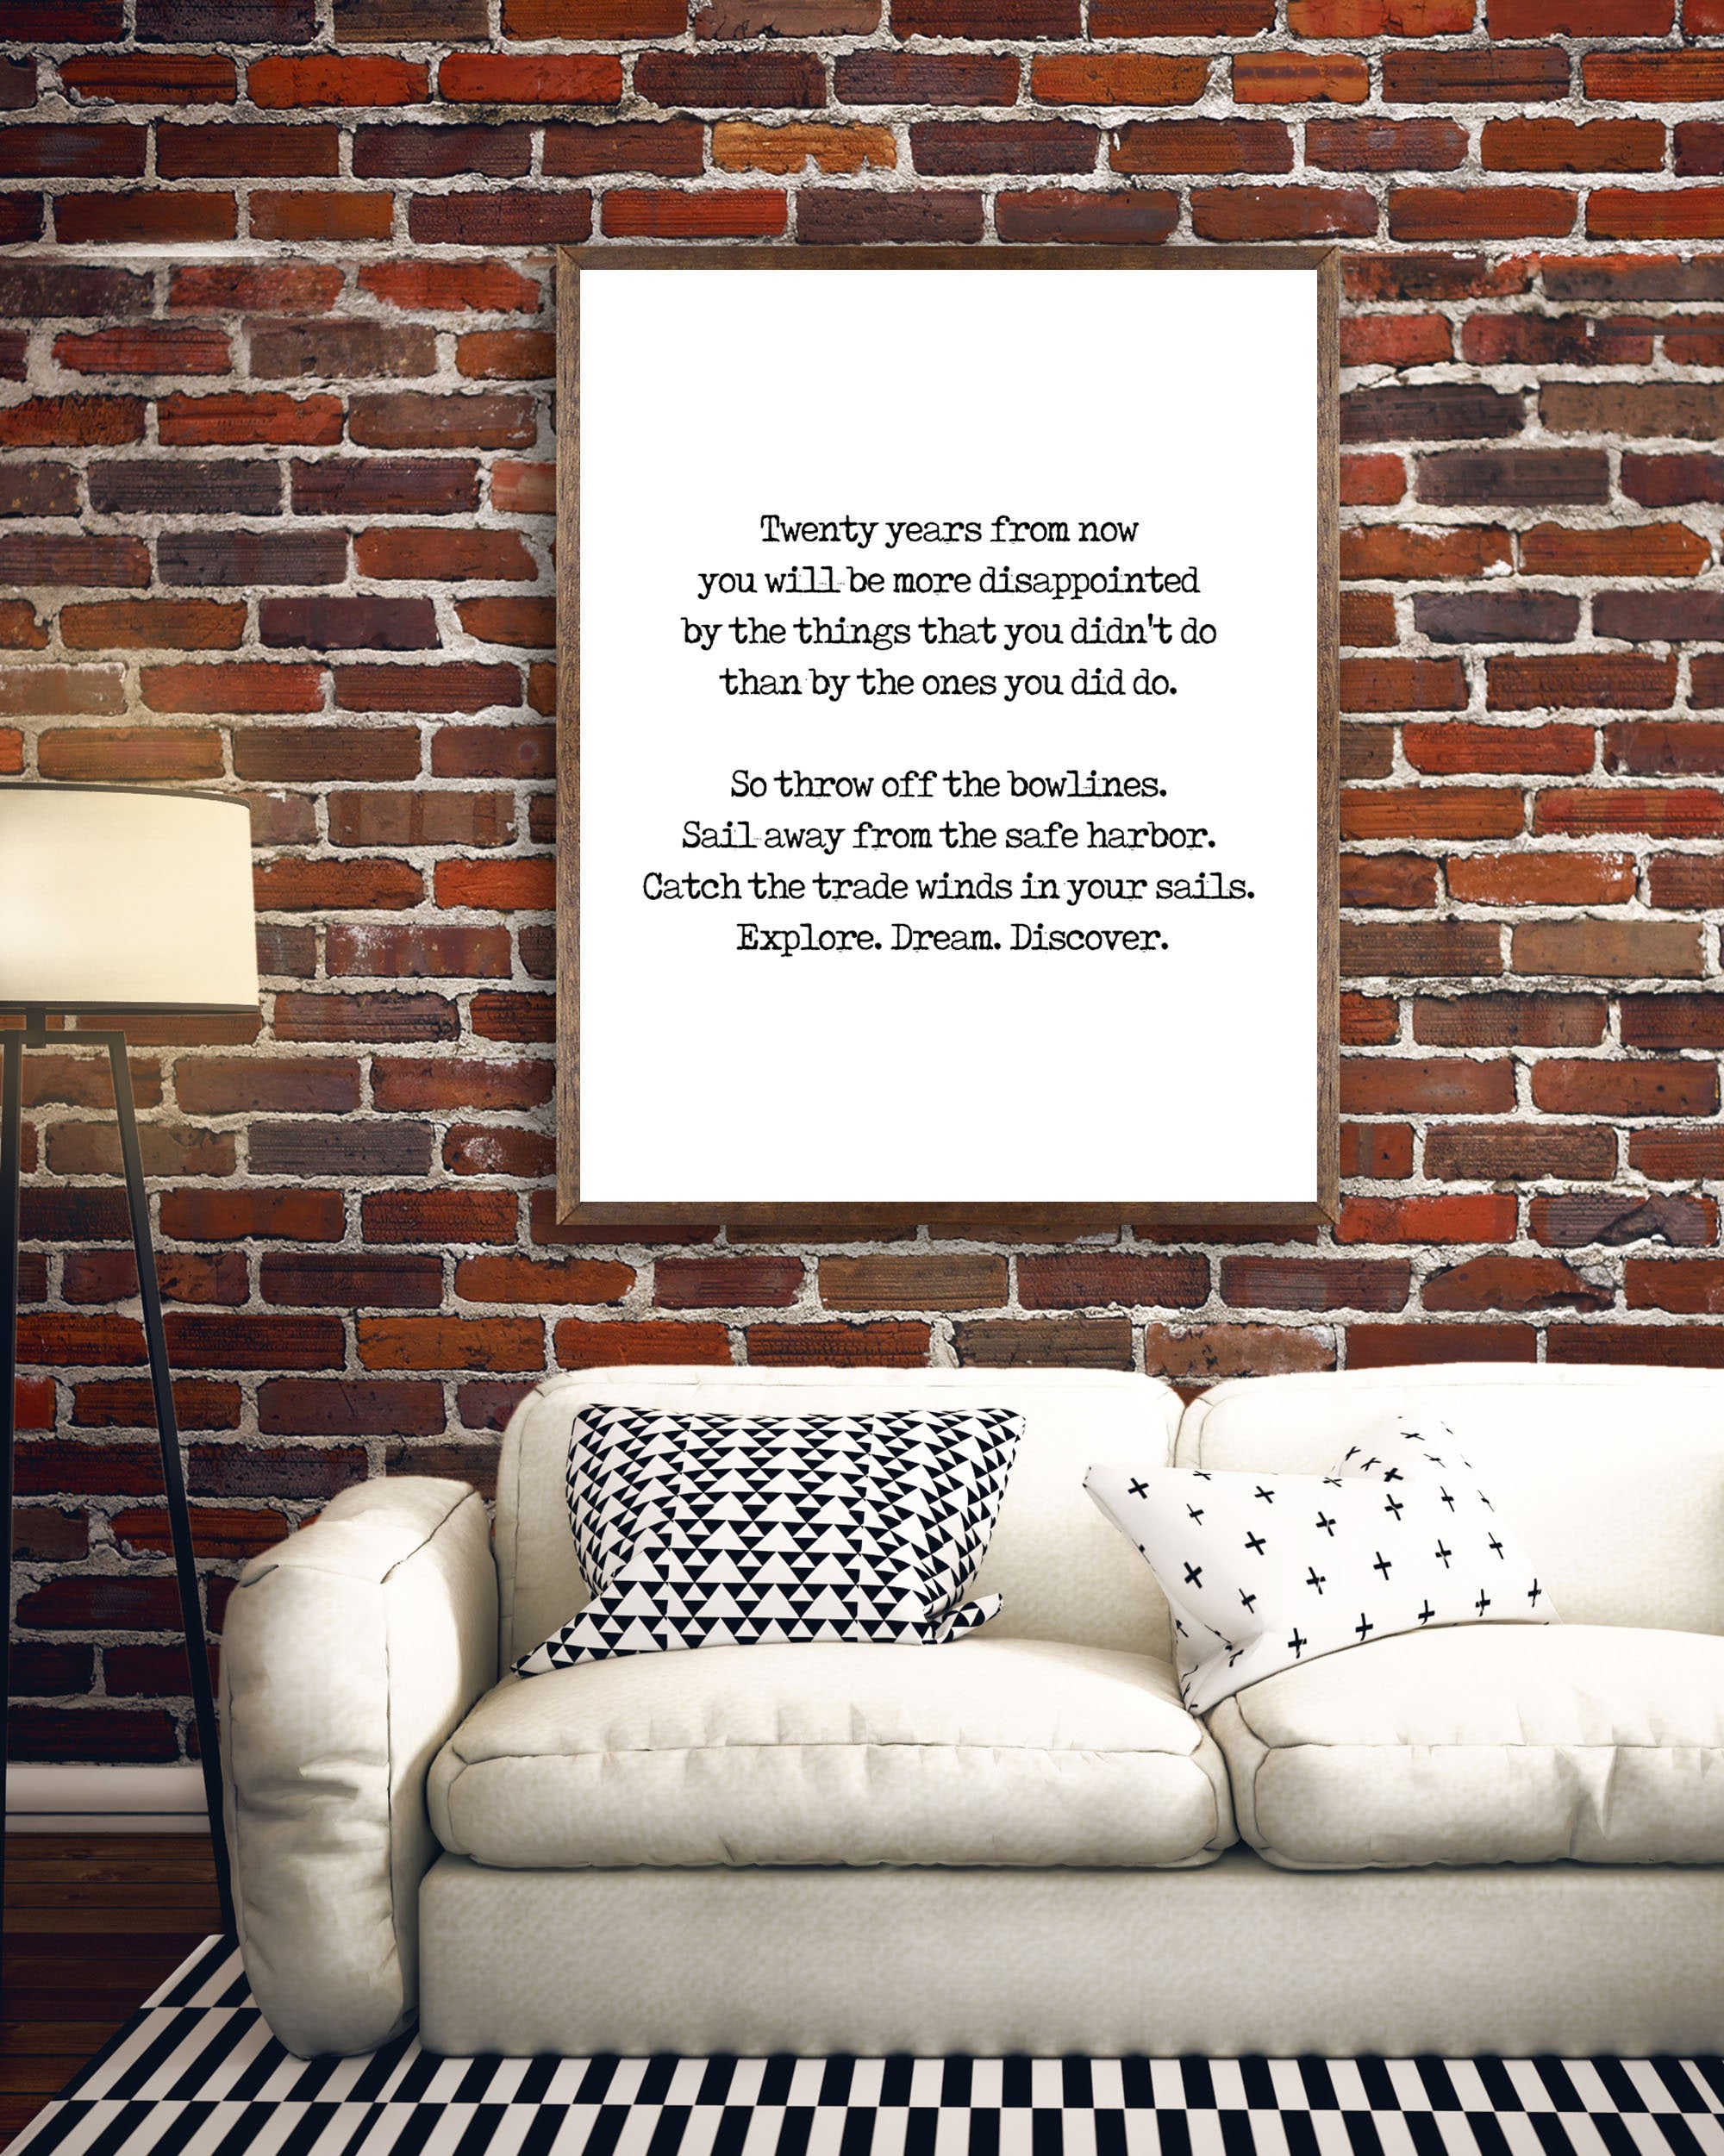 Twenty Years From Now Travel Decor Inspirational Quote Print, Explore Dream Discover Mark Twain Unframed Print - BookQuoteDecor